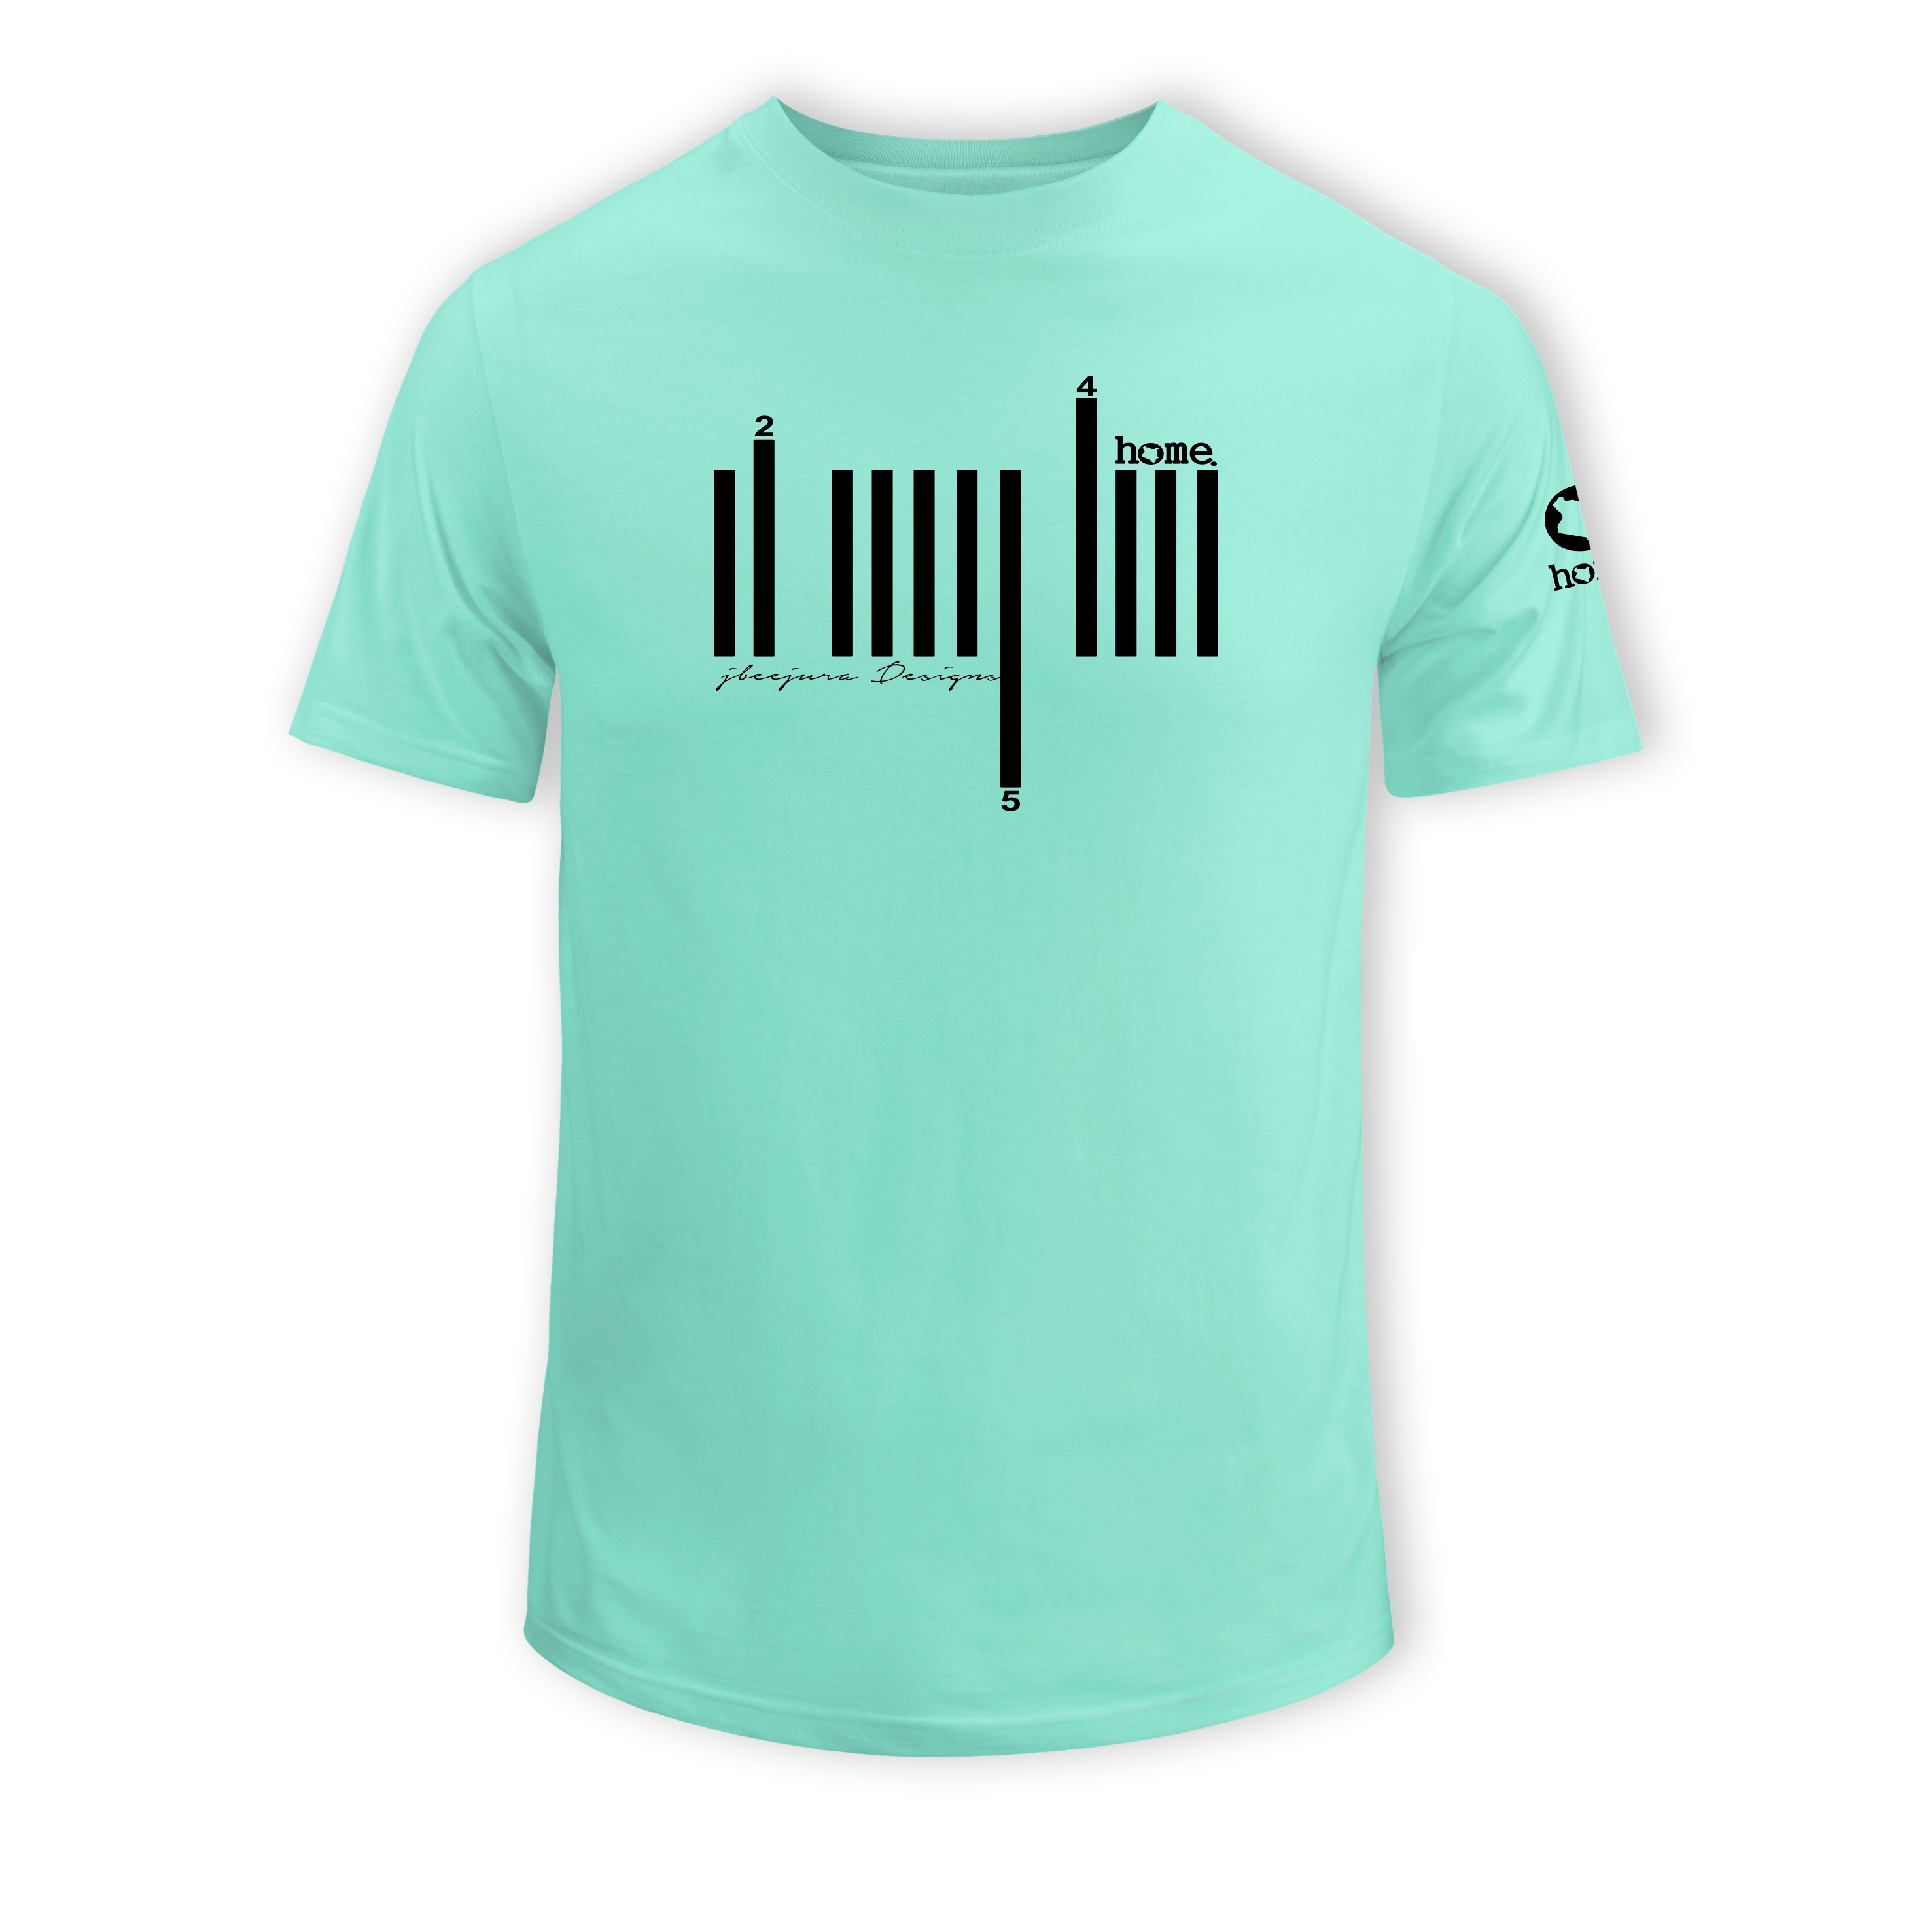 home_254 SHORT-SLEEVED TURQUOISE GREEN T-SHIRT WITH A BLACK BARS PRINT – COTTON PLUS FABRIC